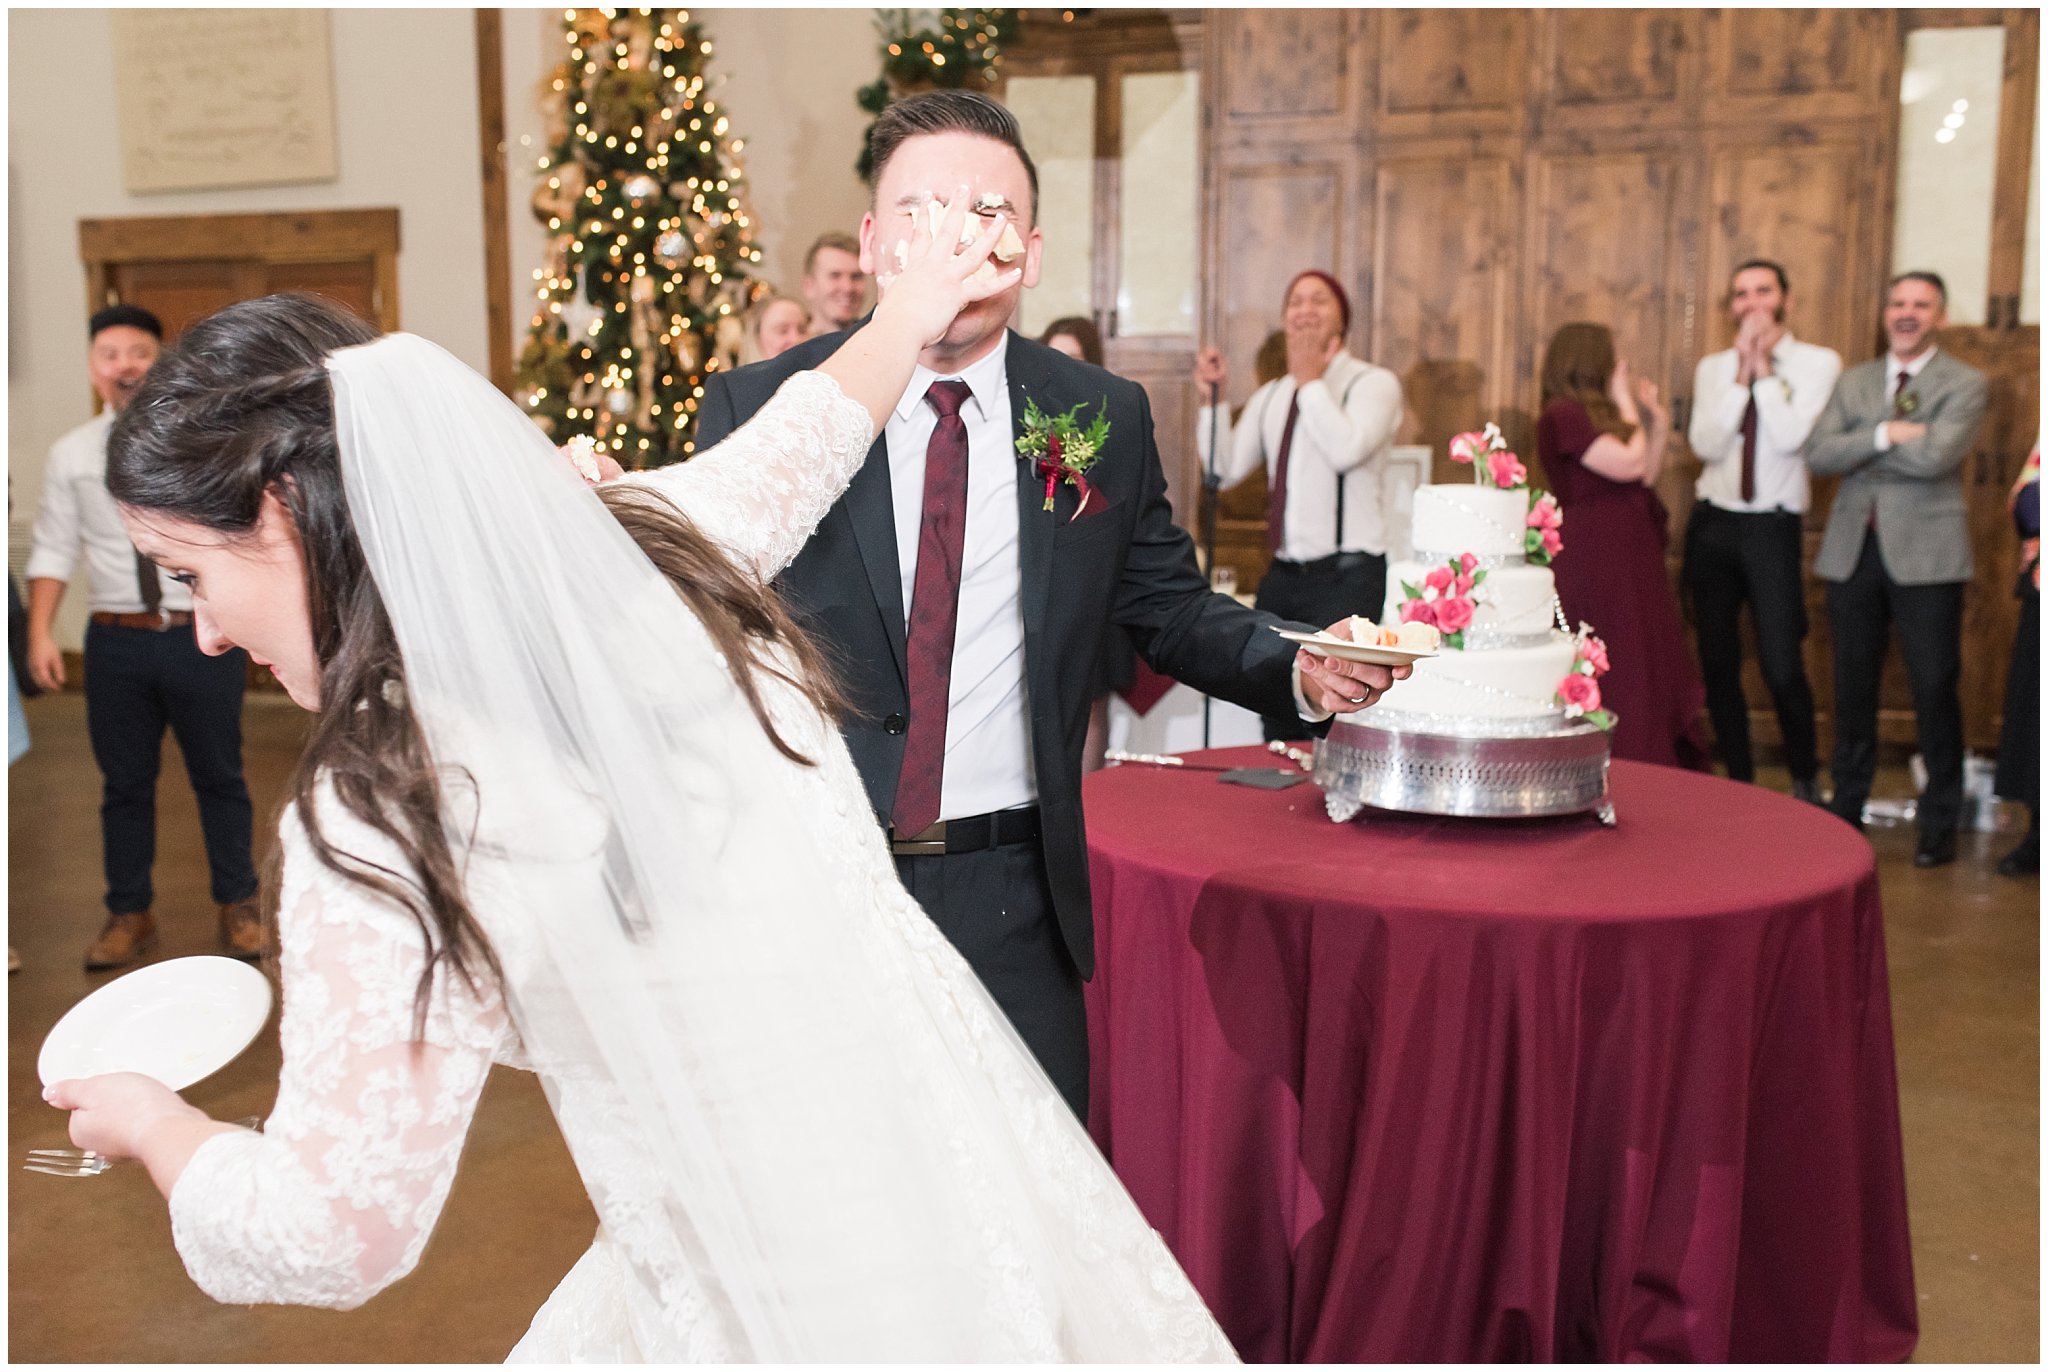 Bride and groom cake smash at the Gathering Place at Gardner Village | Gardner Village Wedding | The Gathering Place | Jessie and Dallin Photography